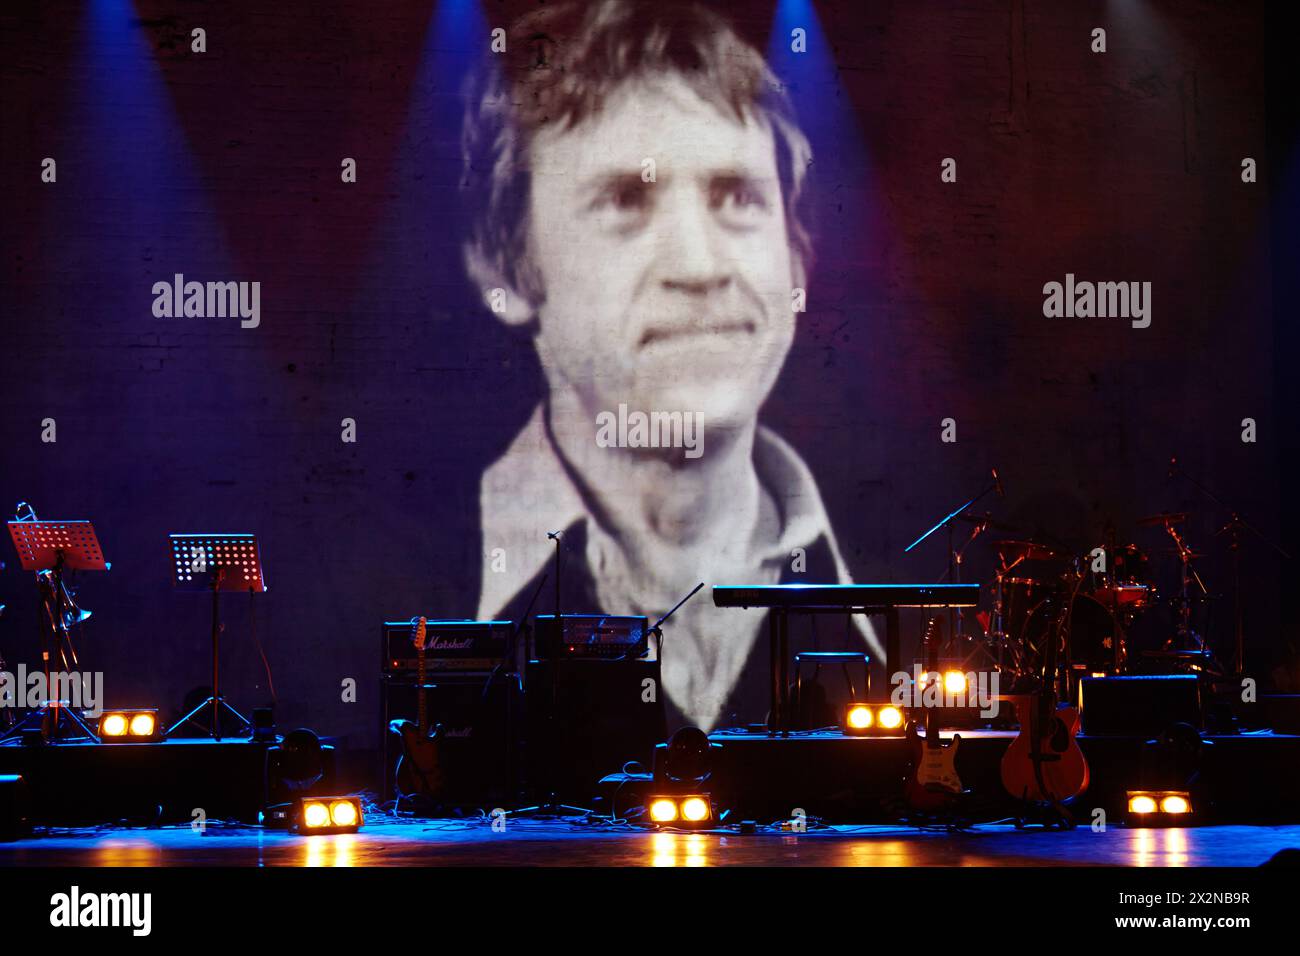 MOSCOW - JAN 23: Stage at Taganka Theater during Award ceremony of Prize named after Vladimir Vysotsky Own Track, Jan 23, 2012, Moscow, Russia. Prize Stock Photo